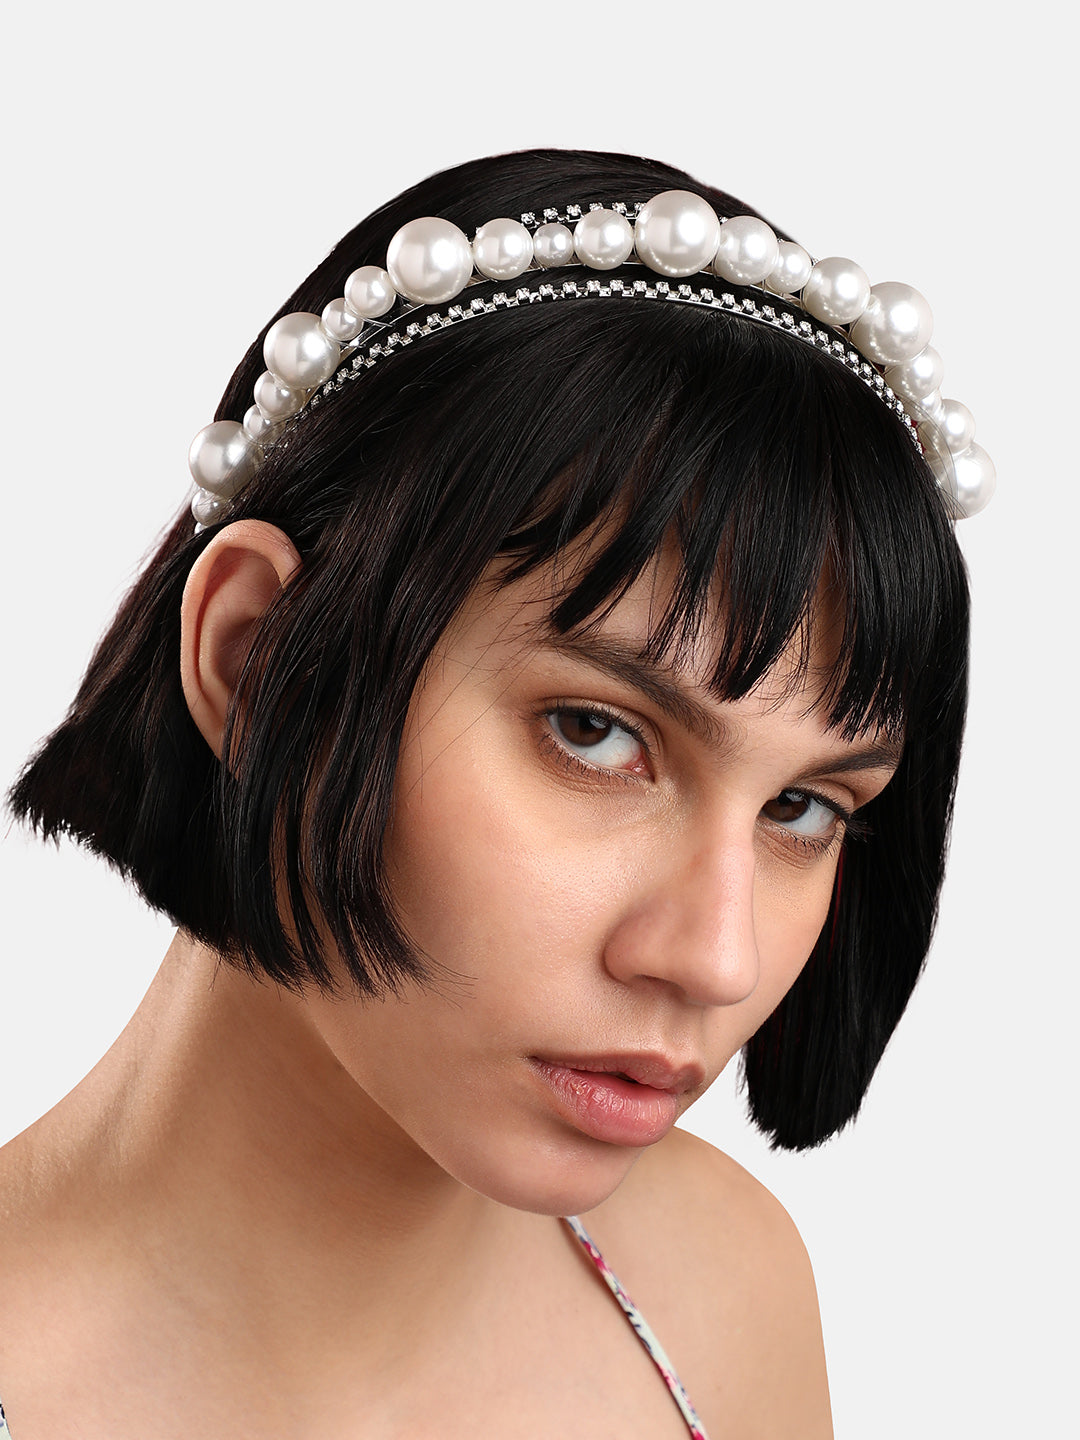 Glistening Charm: Accentuating Style With An Embellished Hairband